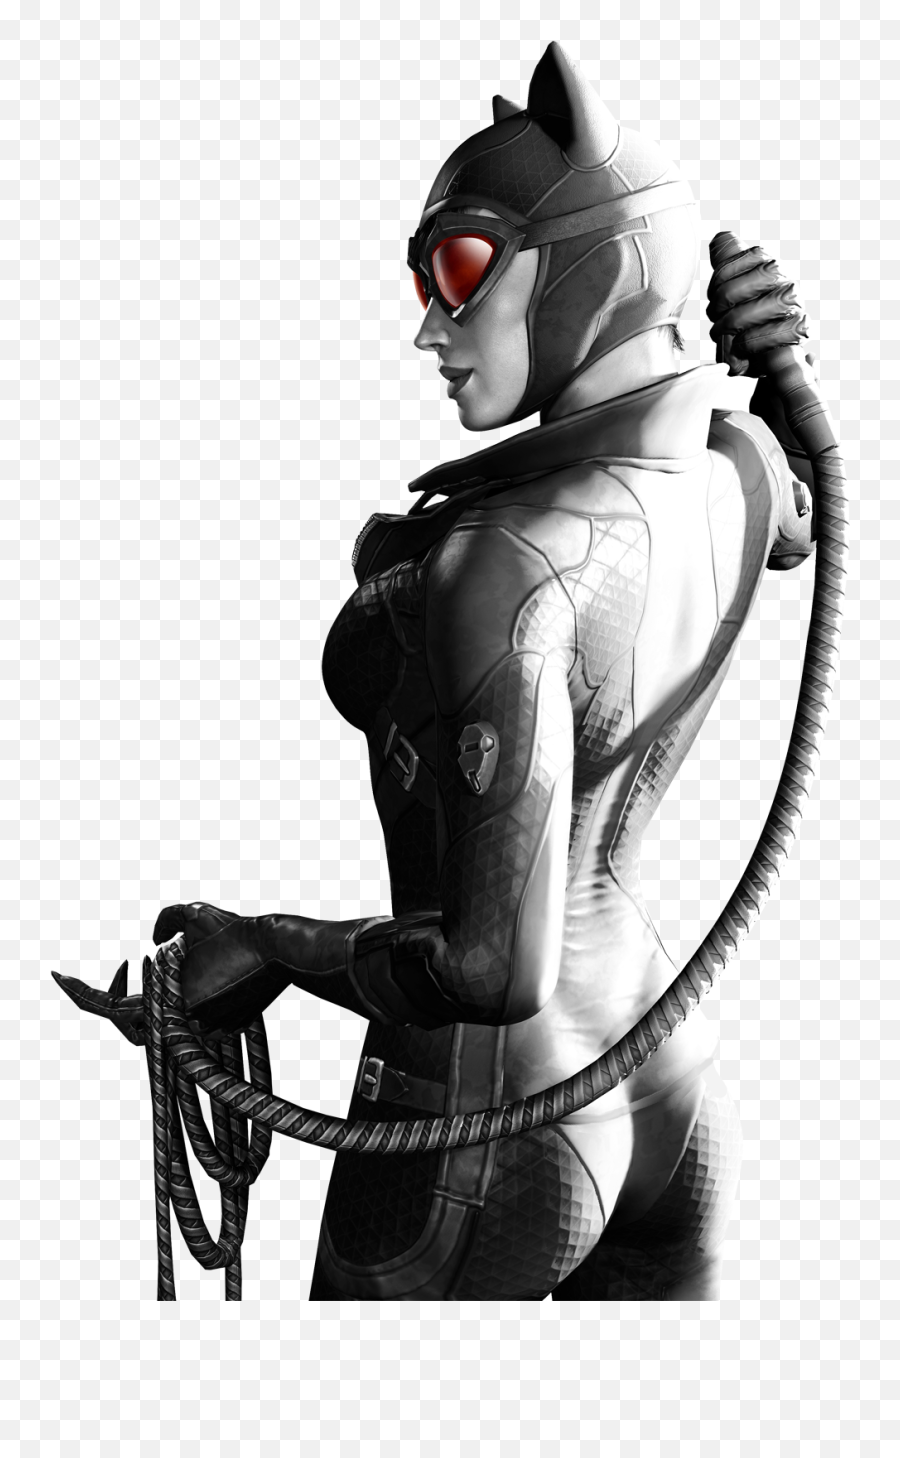 Catwoman Png 4 Image - Catwoman Batman Video Game,Catwoman Png